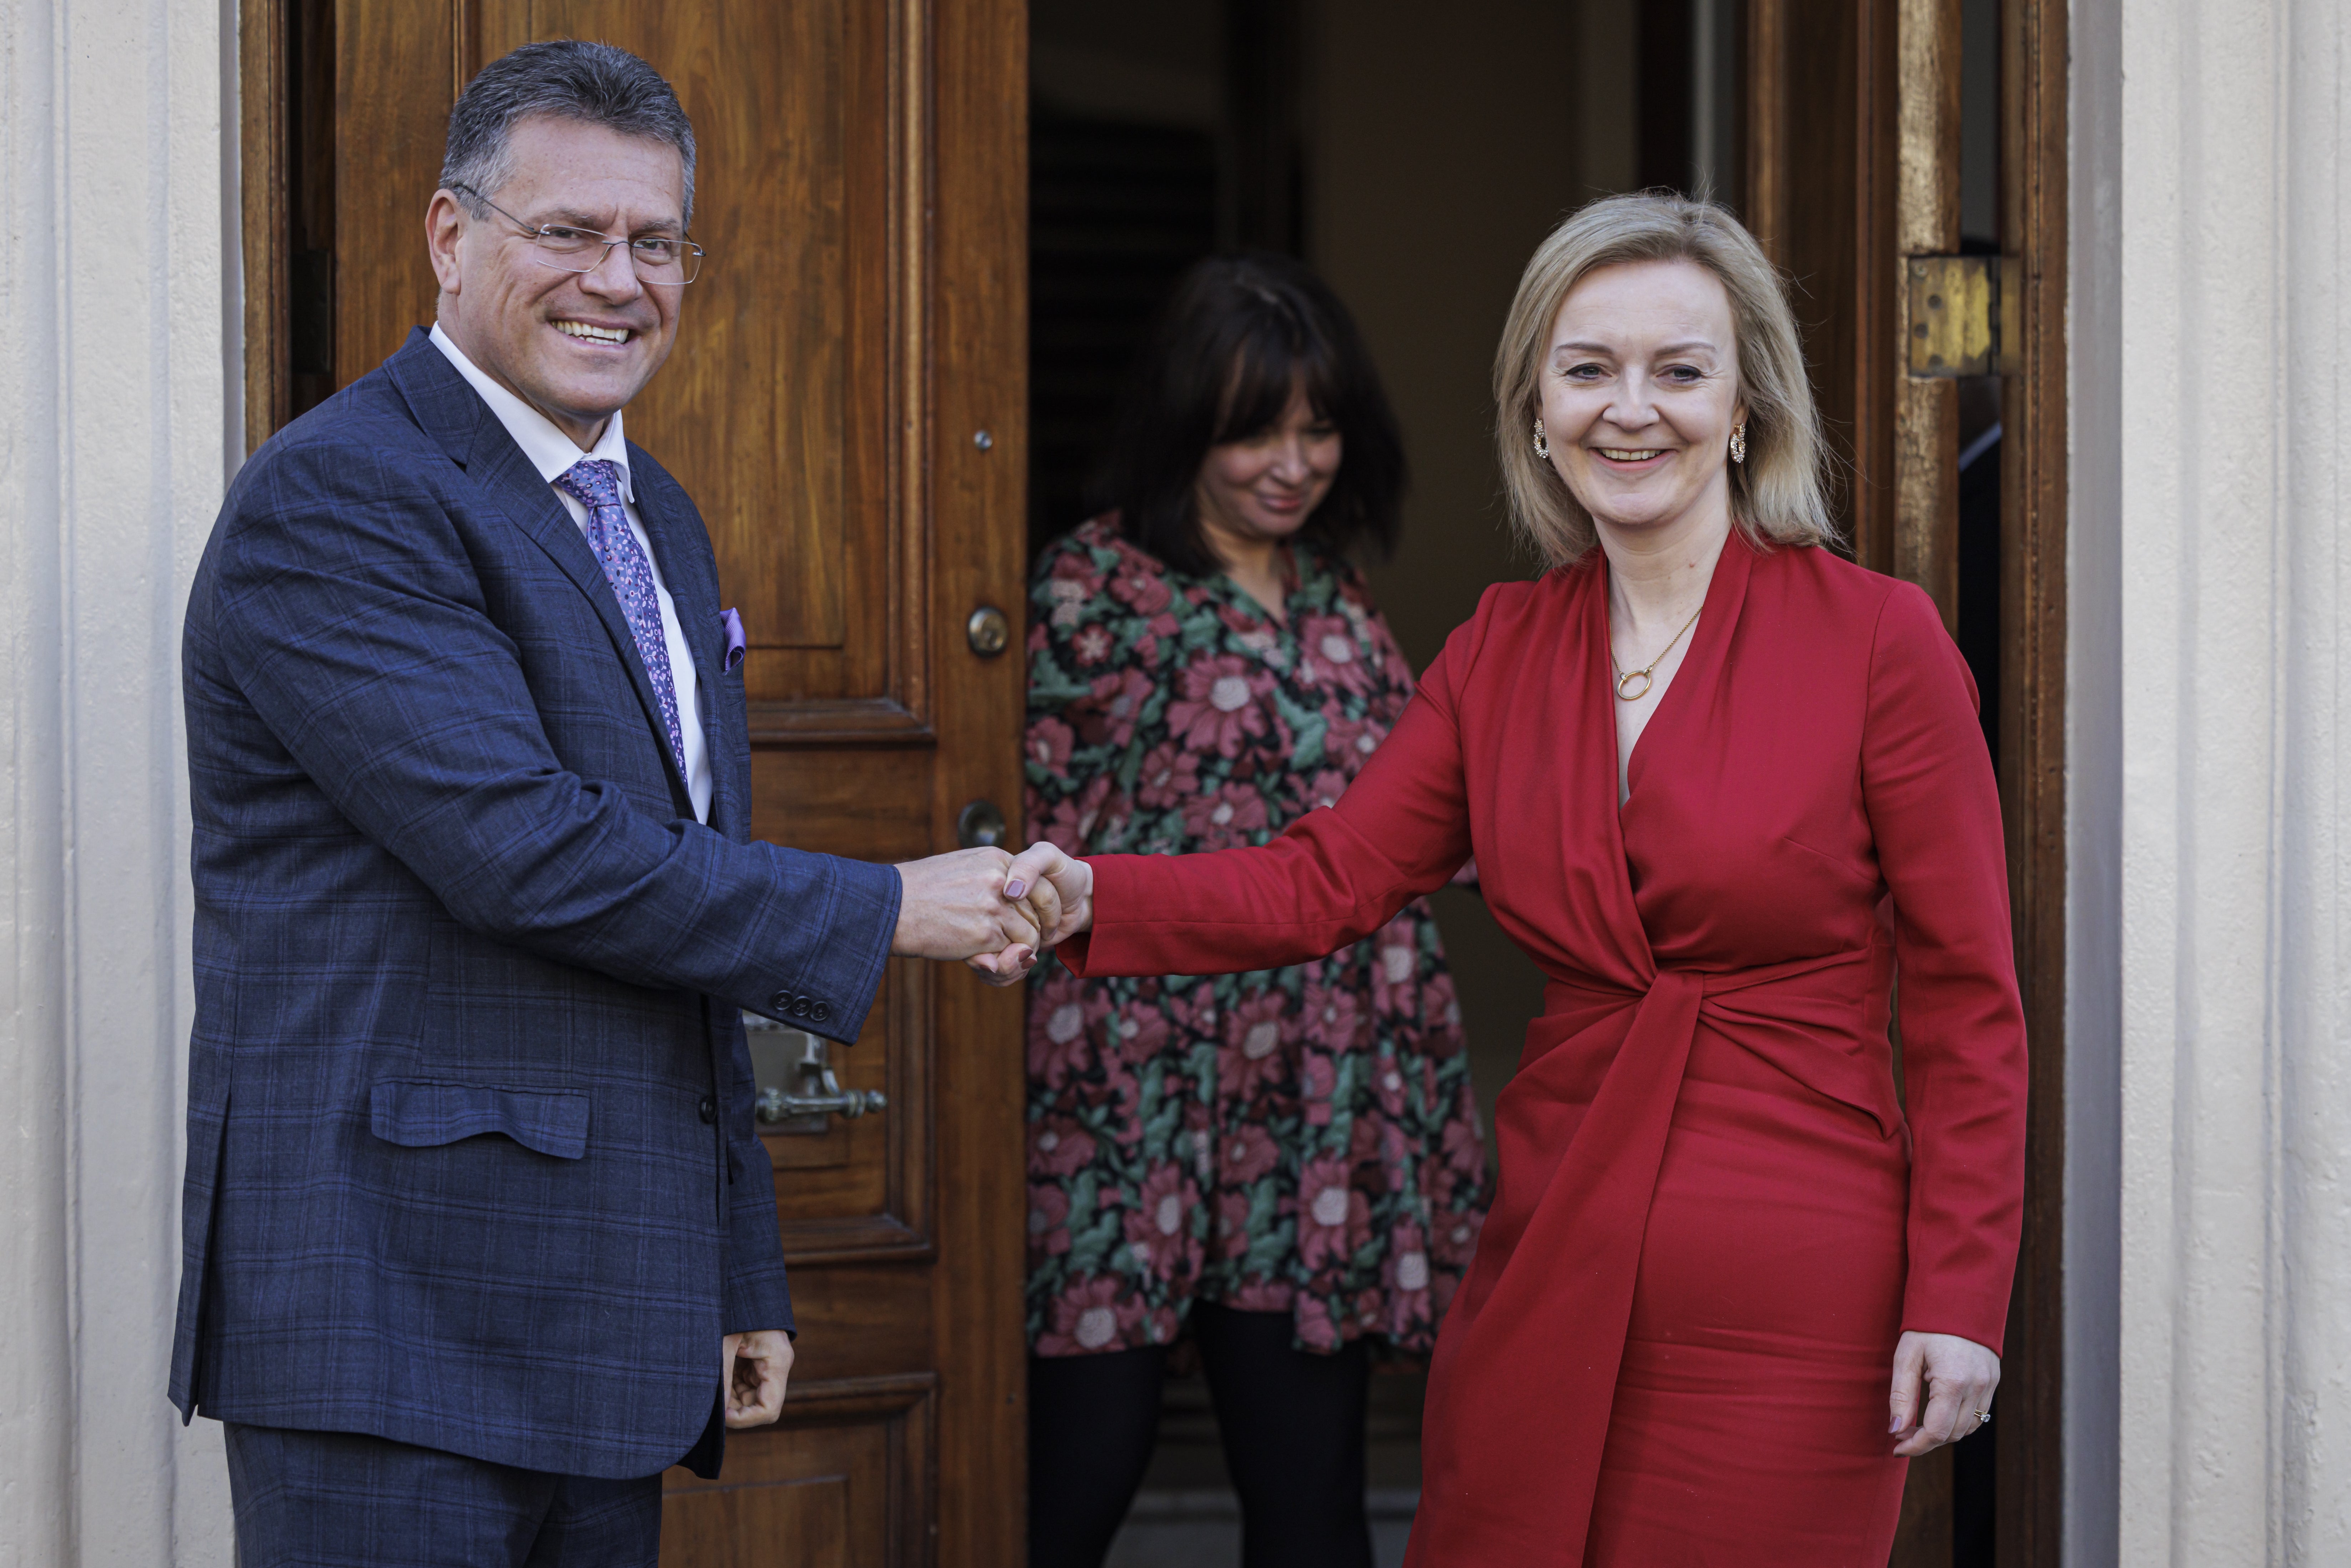 Maros Sefcovic, European Commission vice-president, and Liz Truss, meeting for talks earlier this month